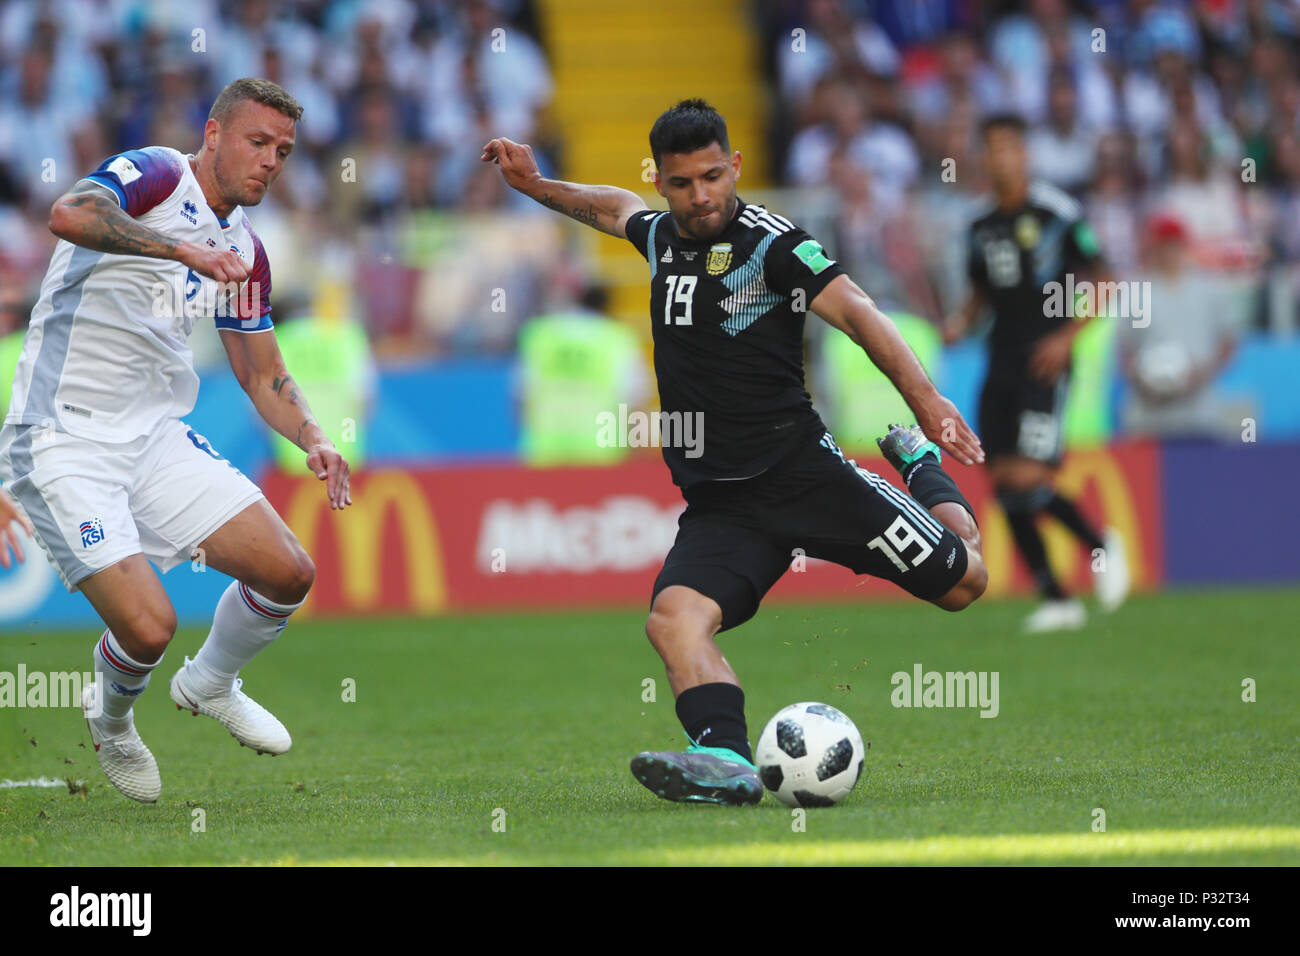 Moscow, Russia. 16th June, 2018. (L-R) Ragnar Sigurdsson (ISL), Sergio Aguero (ARG) Football/Soccer : FIFA World Cup Russia 2018 Group D match between Argentina 1-1 Iceland at Spartak Stadium in Moscow, Russia . Credit: Yohei Osada/AFLO SPORT/Alamy Live News Stock Photo